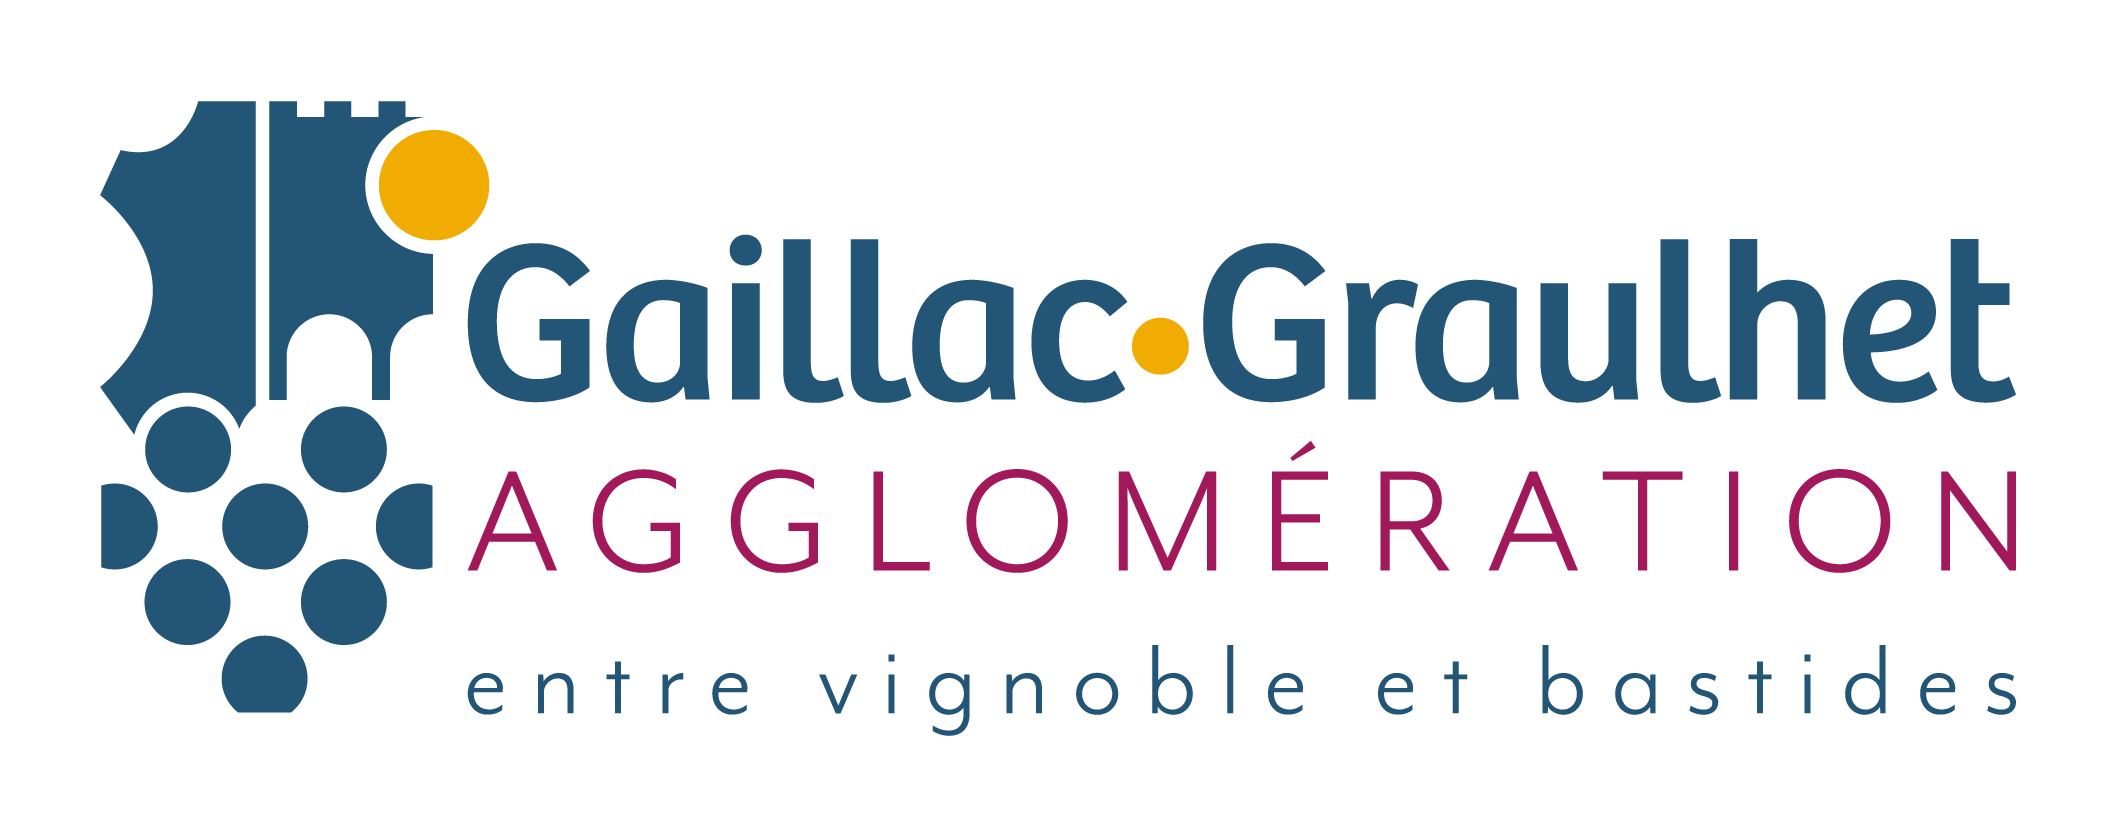 gaillac grahlet agglomeration